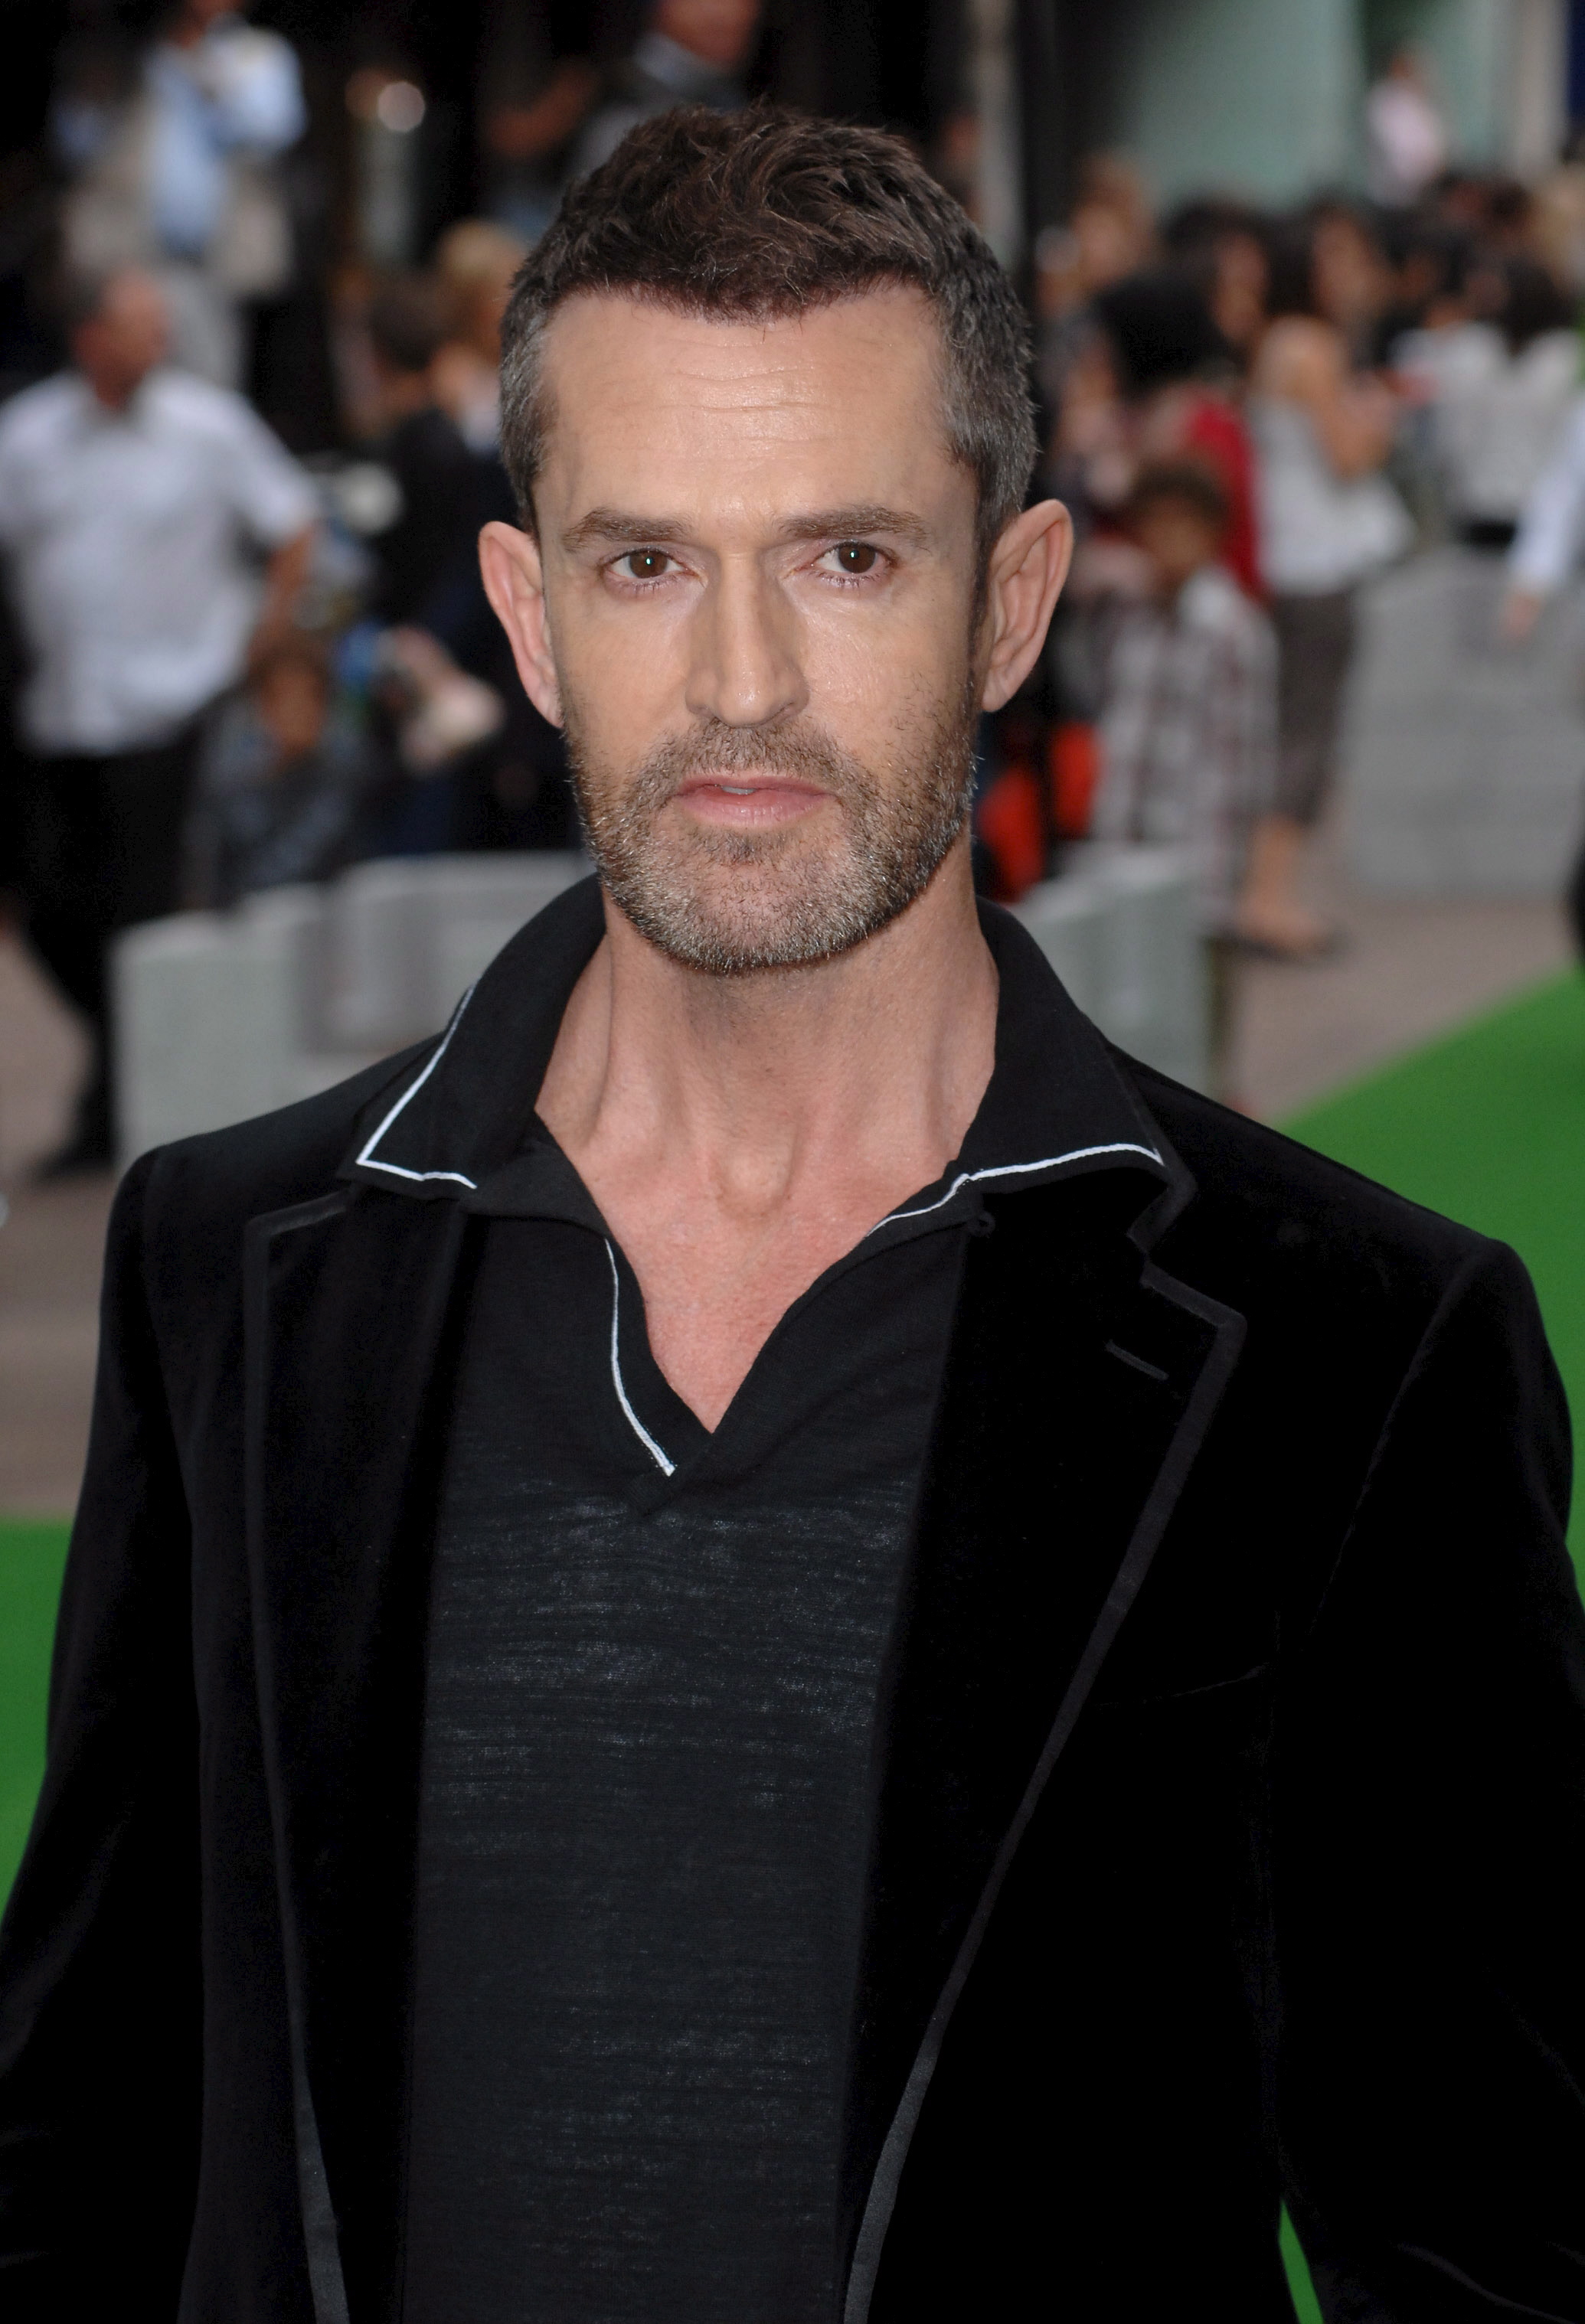 <p>Though Rupert Everett (pictured in 2007) is clearly a talented actor, his gorgeous face certainly didn't hurt him when it came to winning roles. Surely he wouldn't alter something so key to his appeal, right?</p>